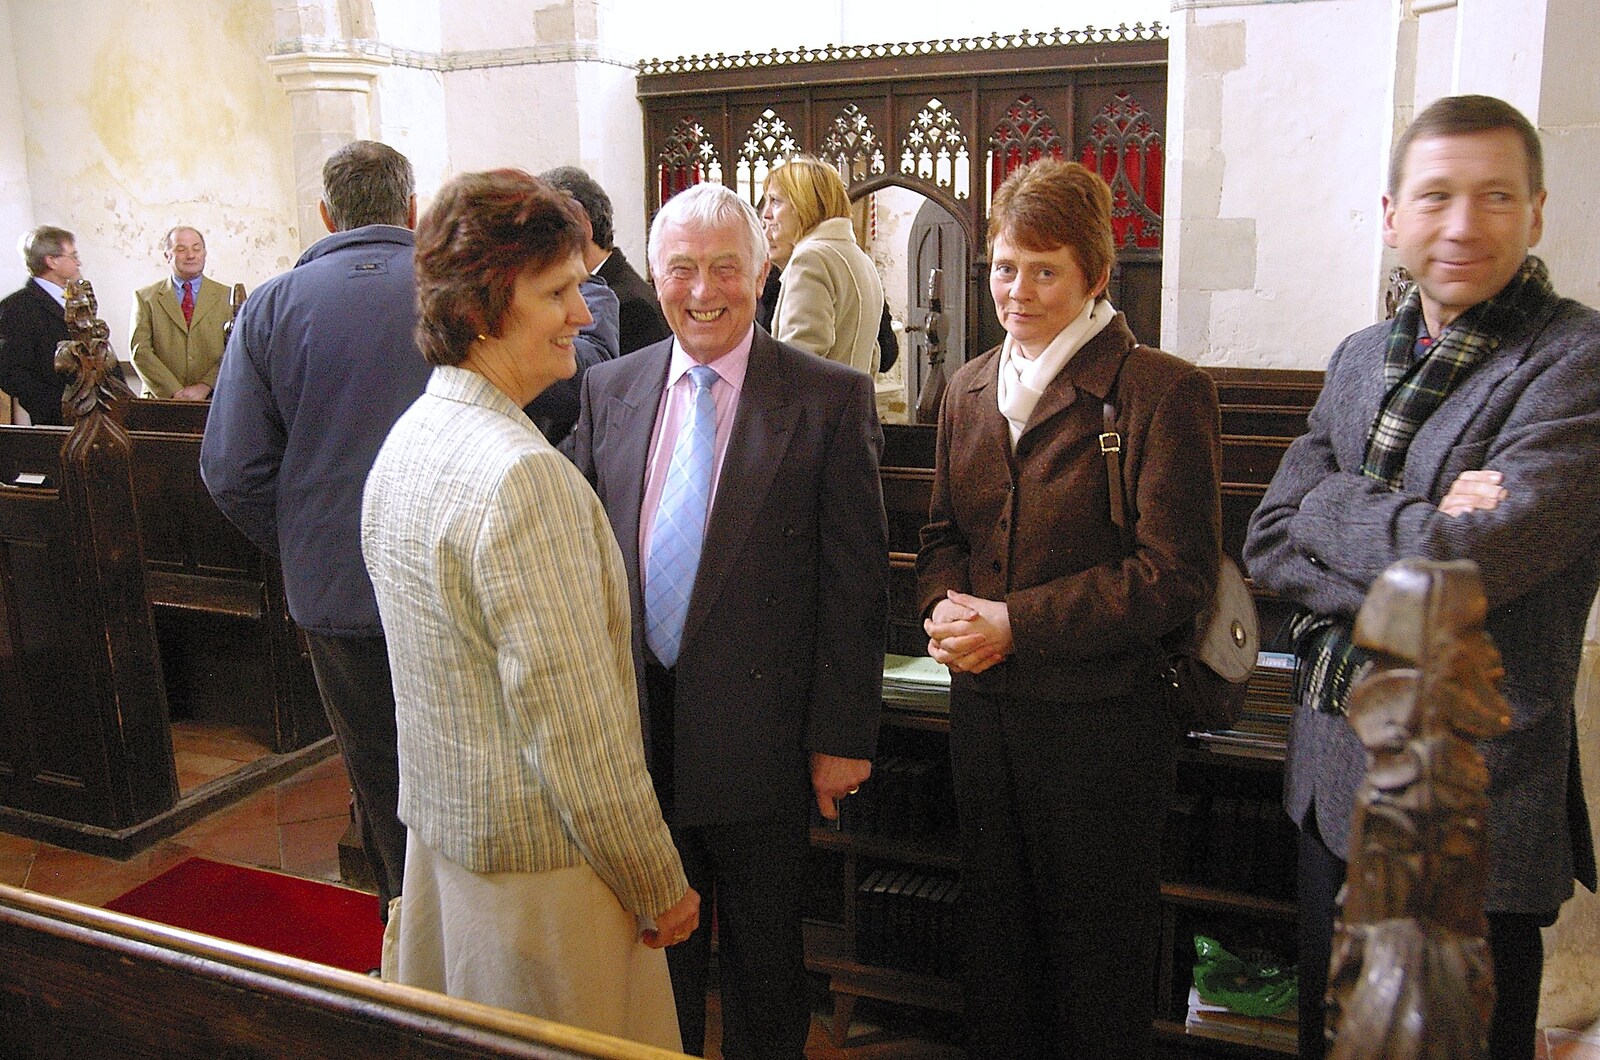 Pippa gives a look from Clairesprog Christening, Church of St. Margaret of Antioch, Thrandeston, Suffolk - 19th March 2006